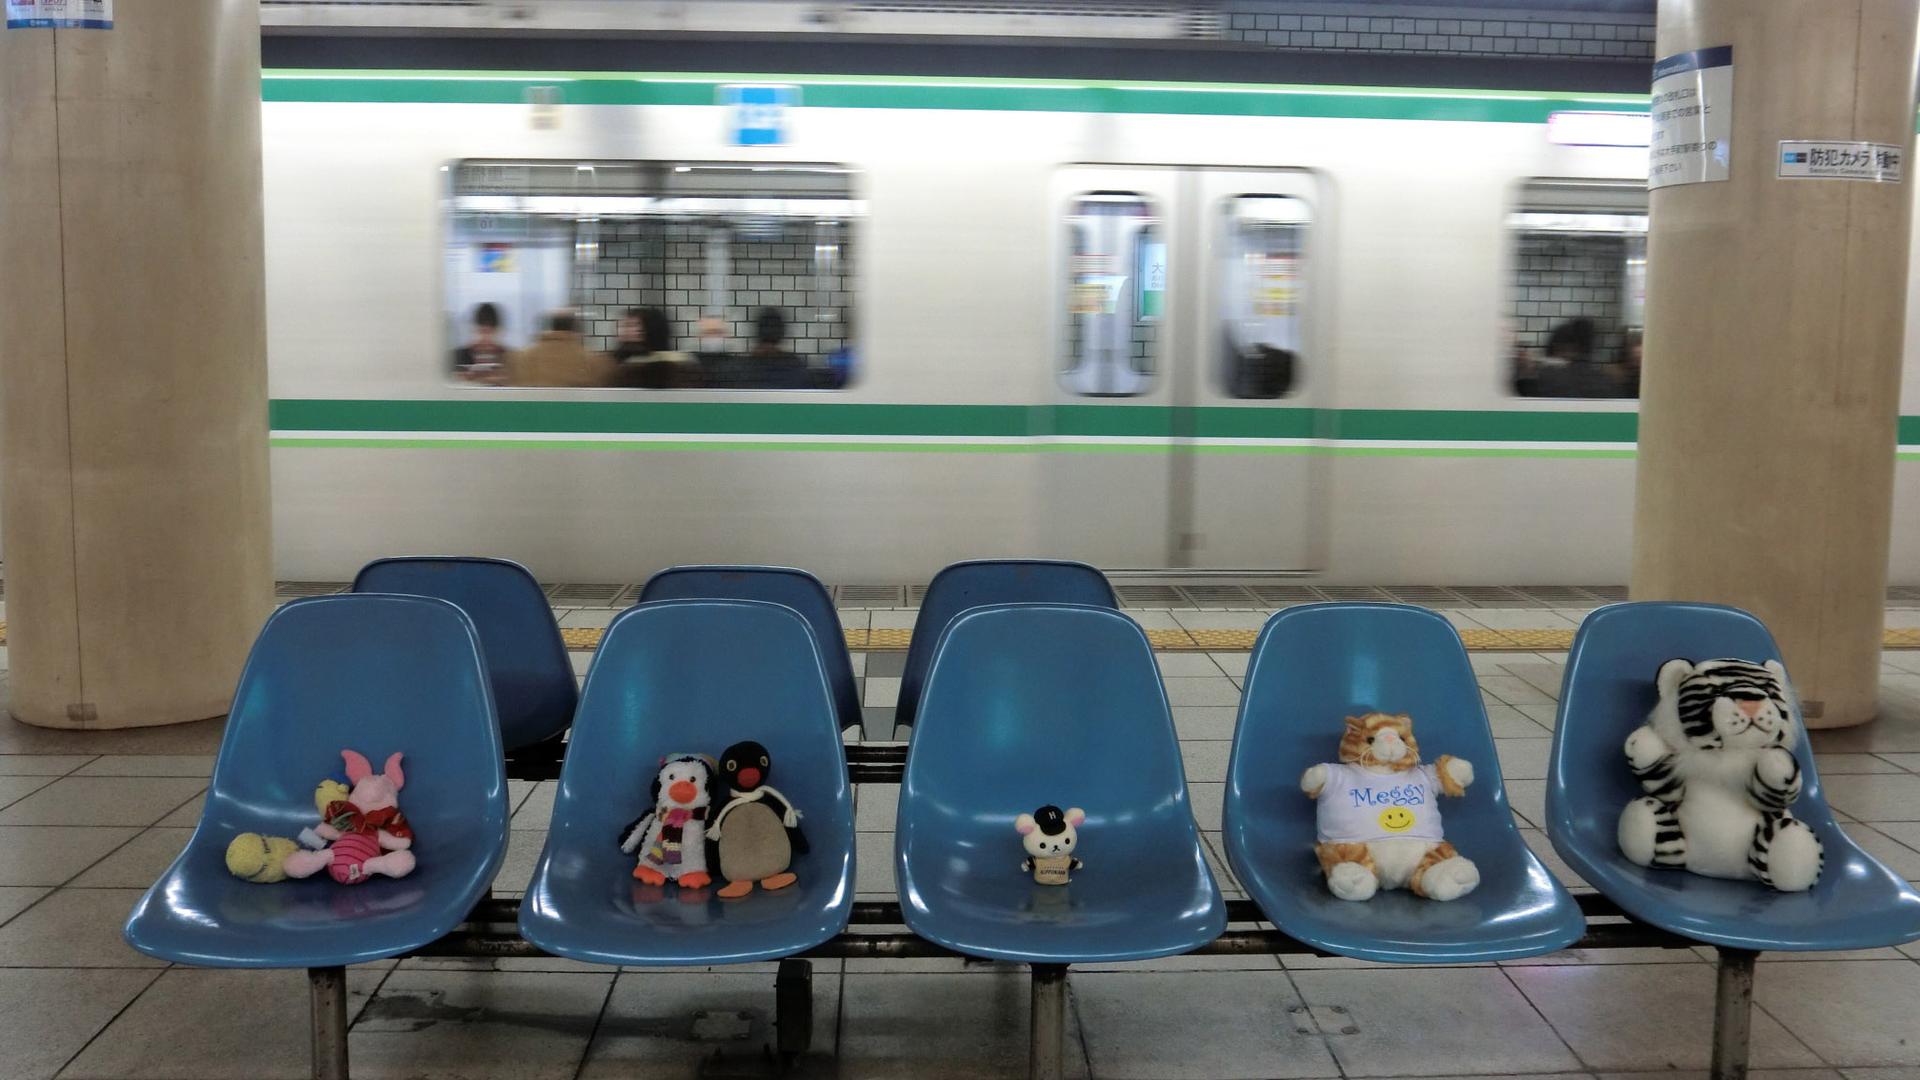 Meggy Weggy (the stuffed cat) and her tour group wait for the Chiyoda Line in Tokyo's metro system.